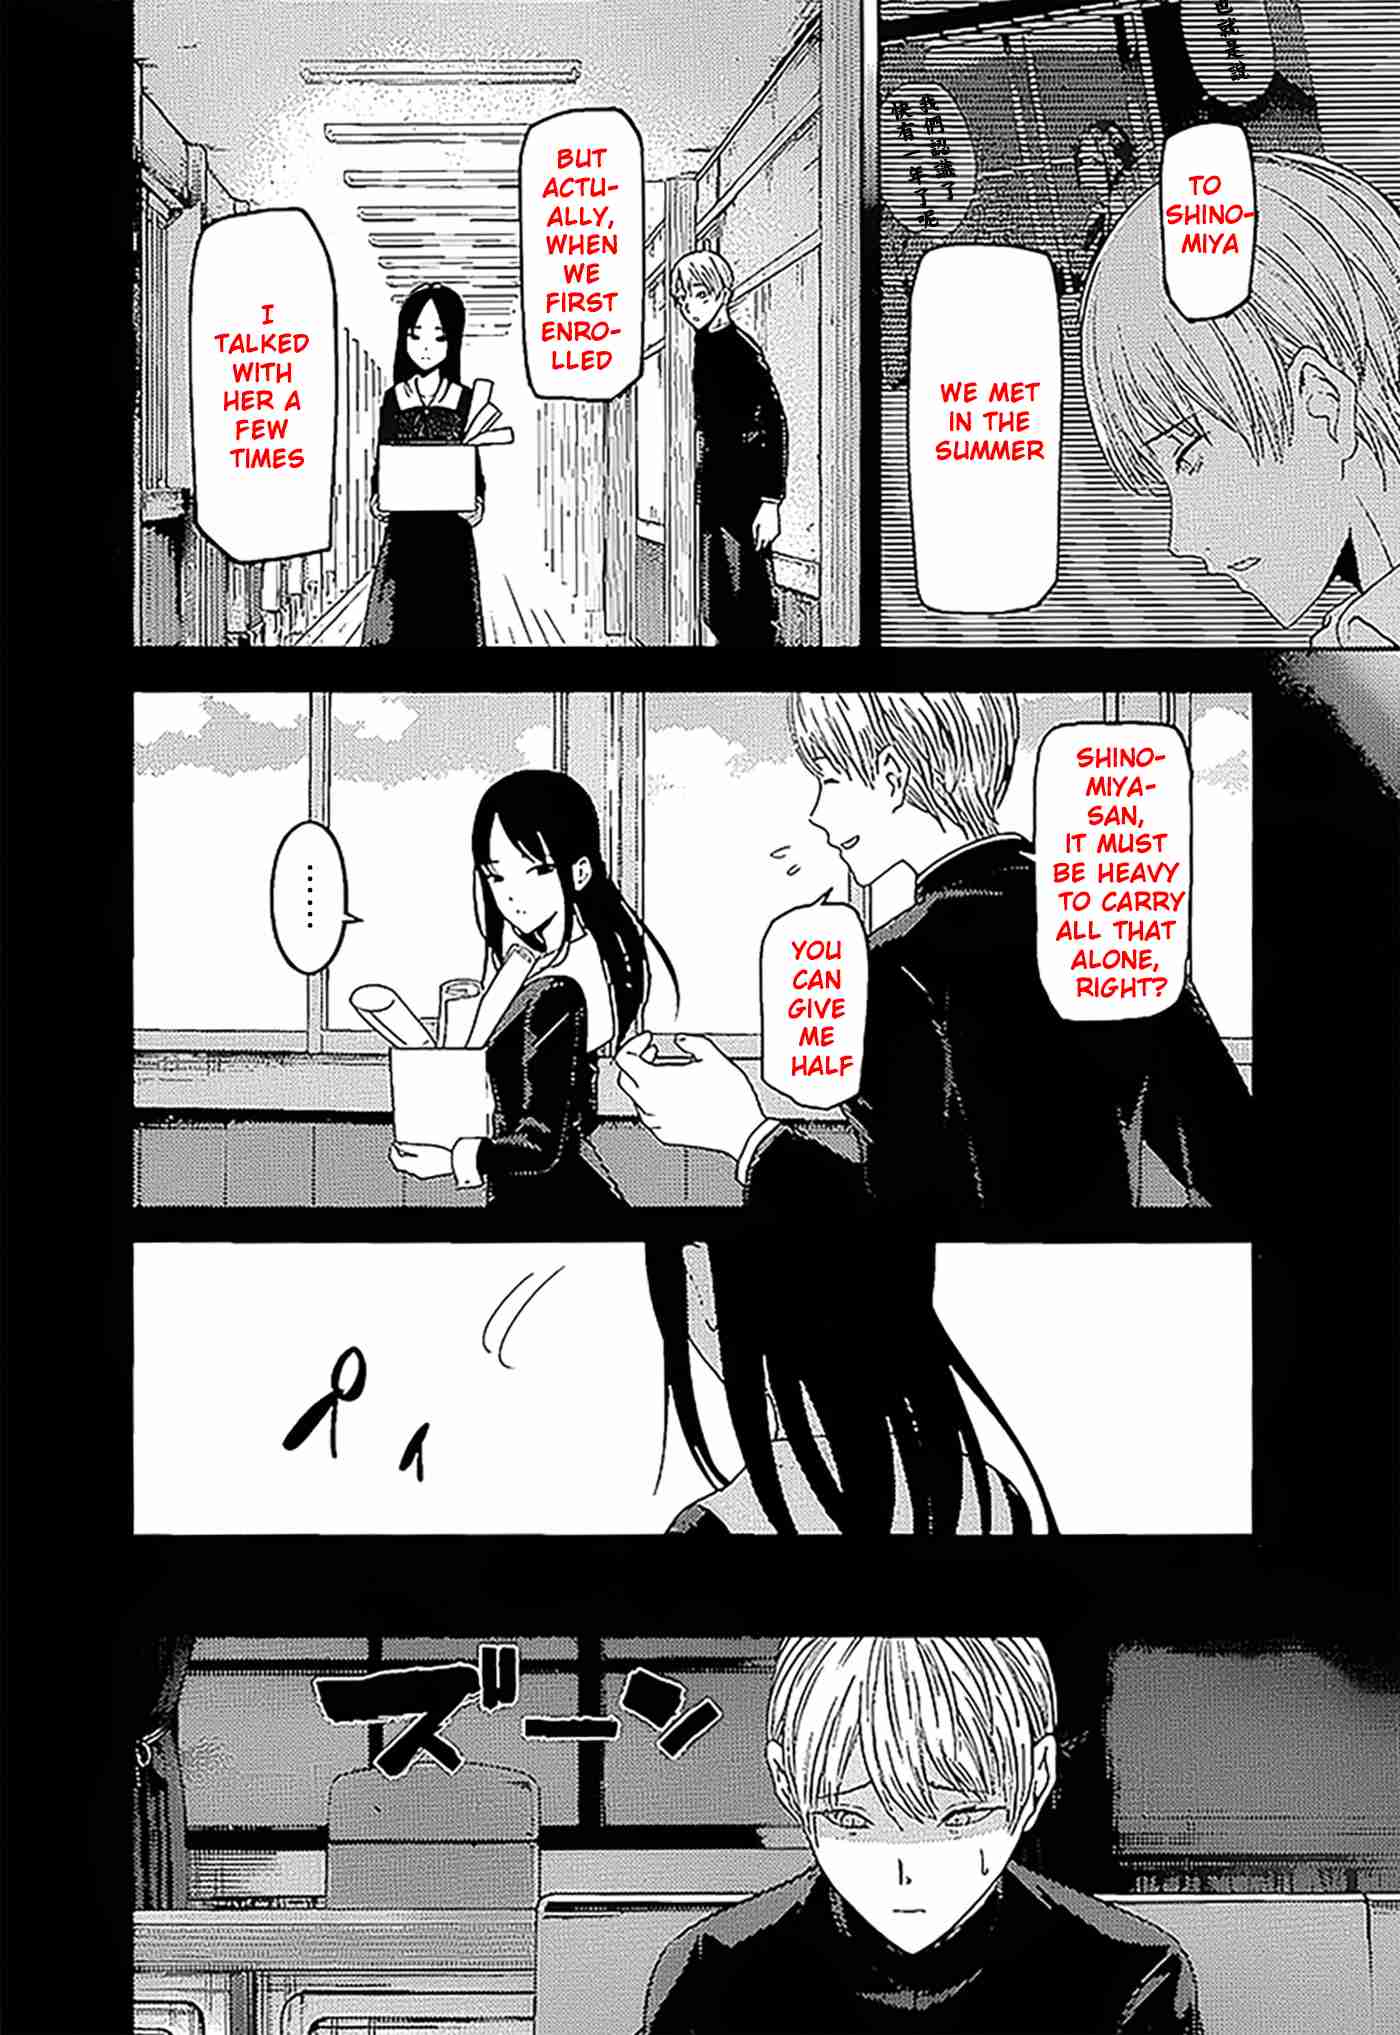 Kaguya Wants to be Confessed To: The Geniuses' War of Love and Brains Vol.[DELETED] Ch.147